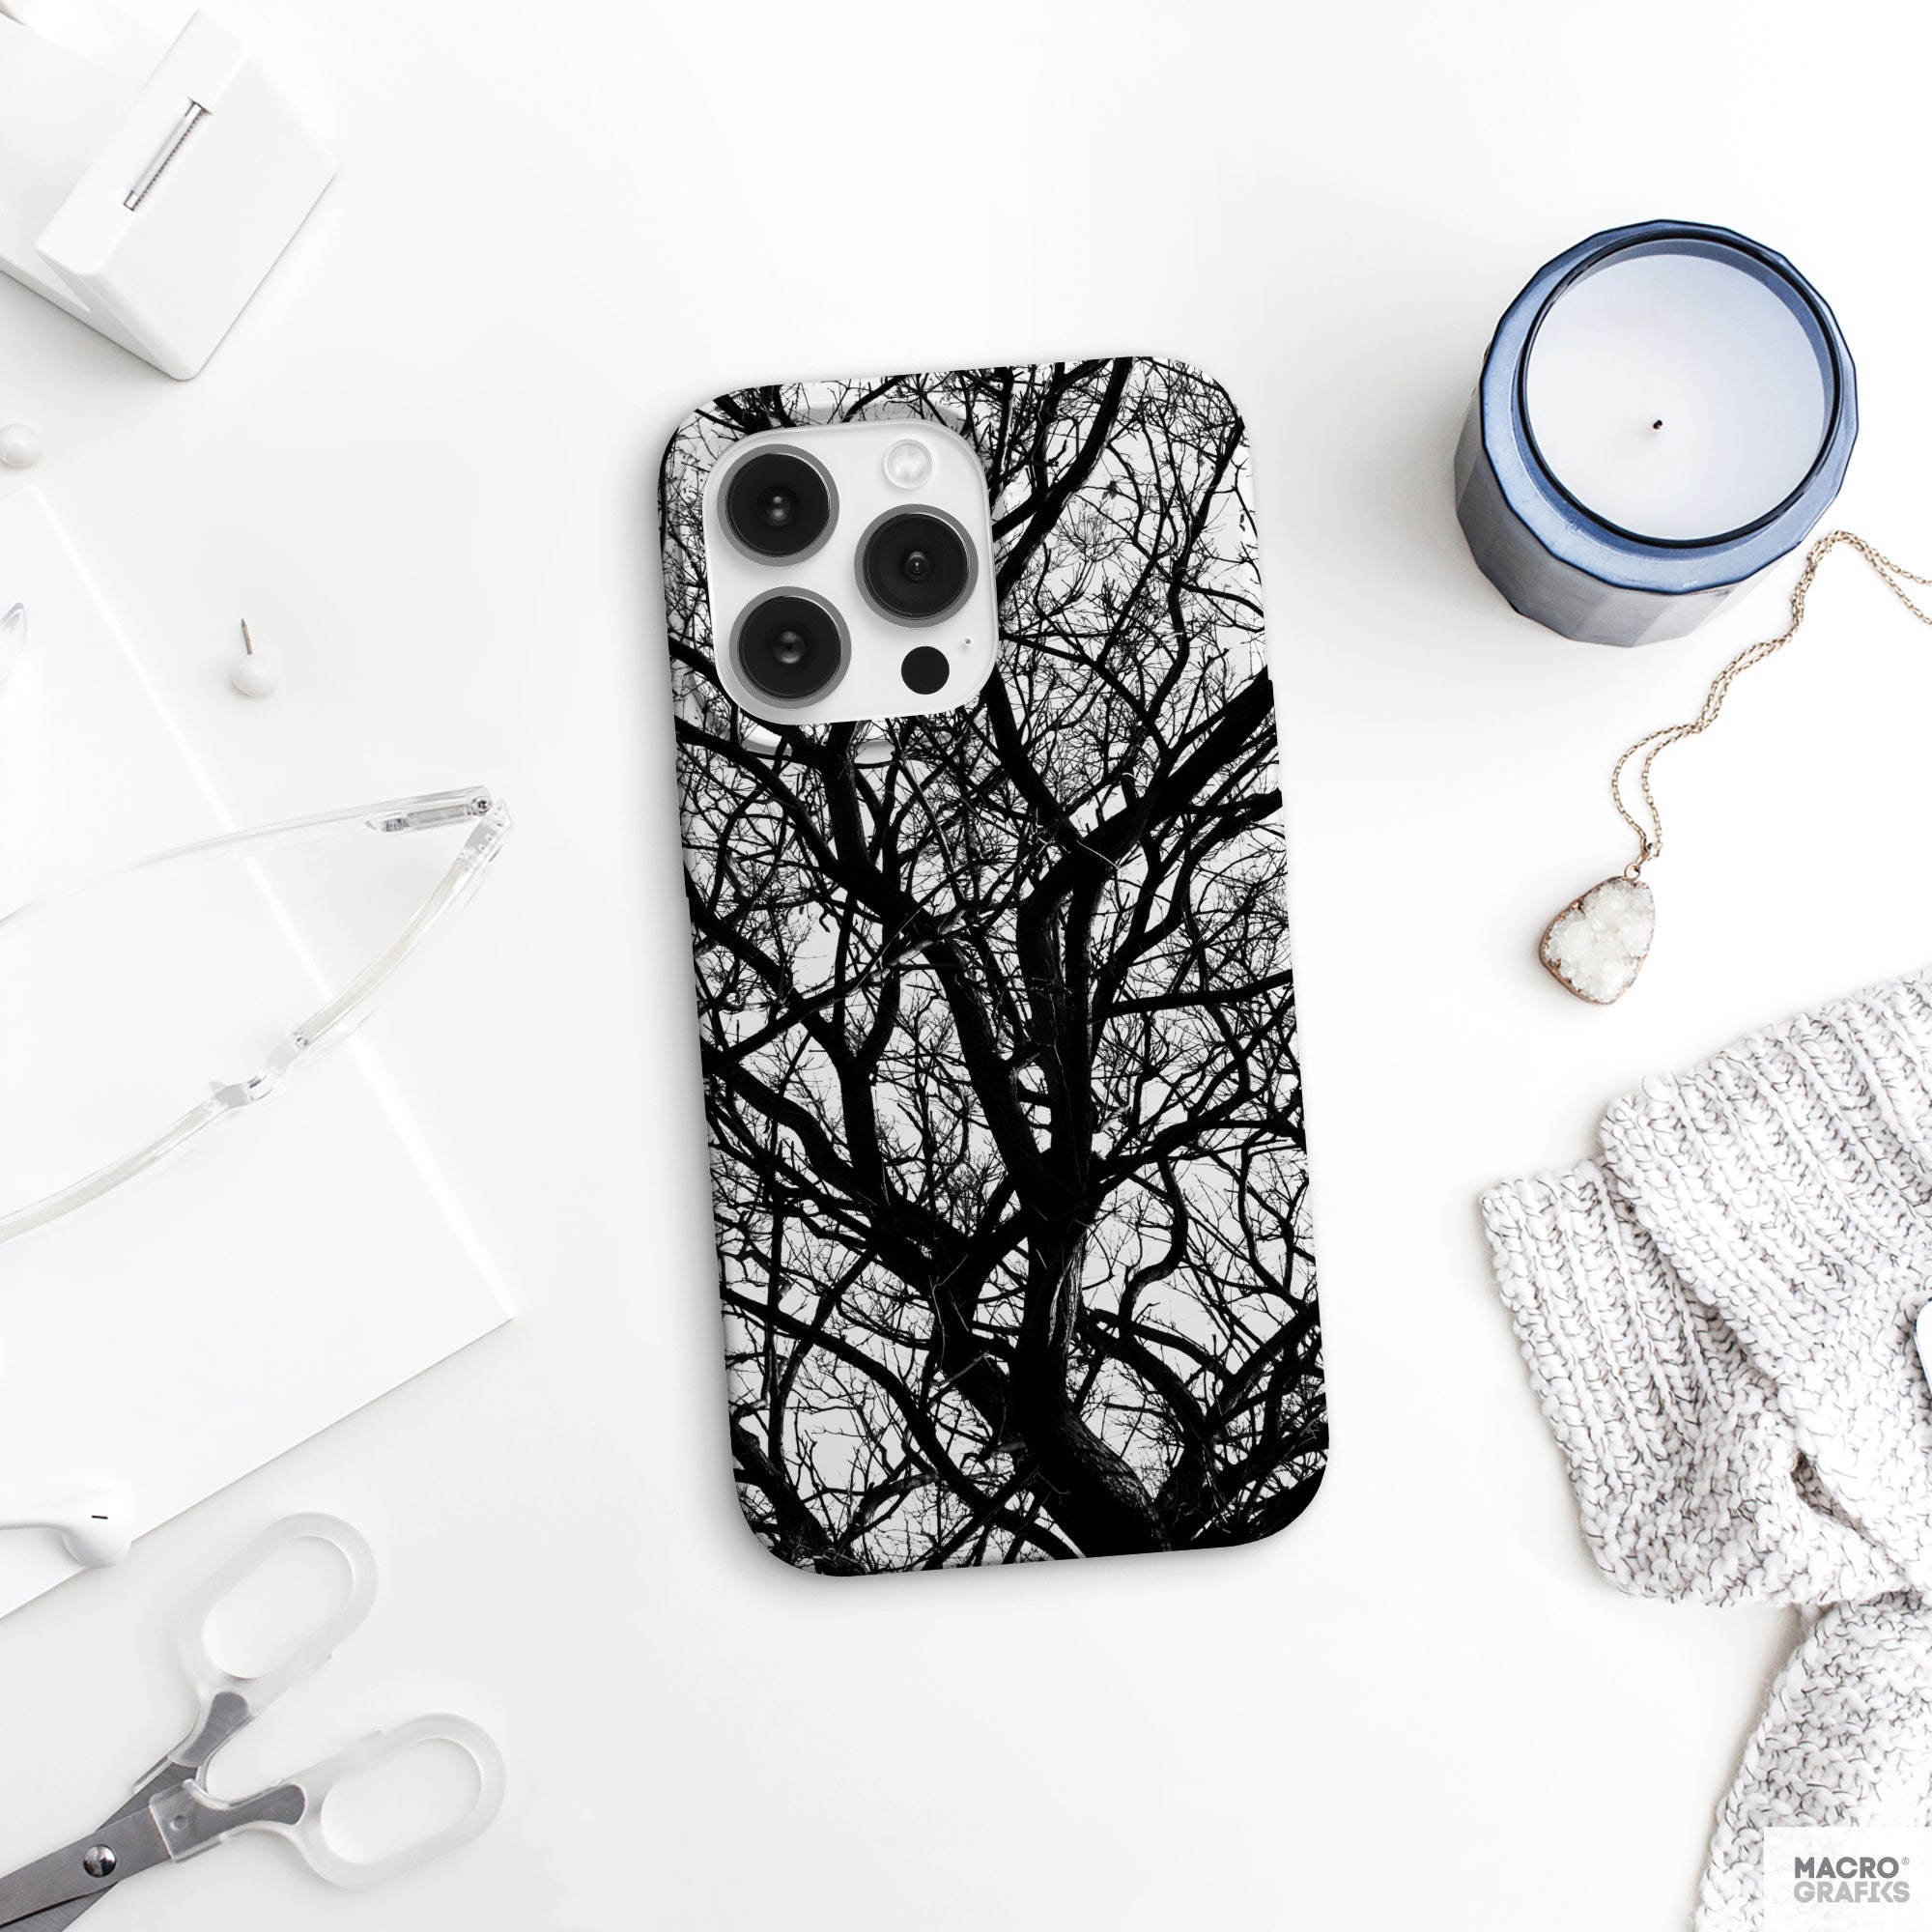 Bore Unødvendig Highland Branches Phone Case iPhone 8 Cases Black and White Dried - Etsy